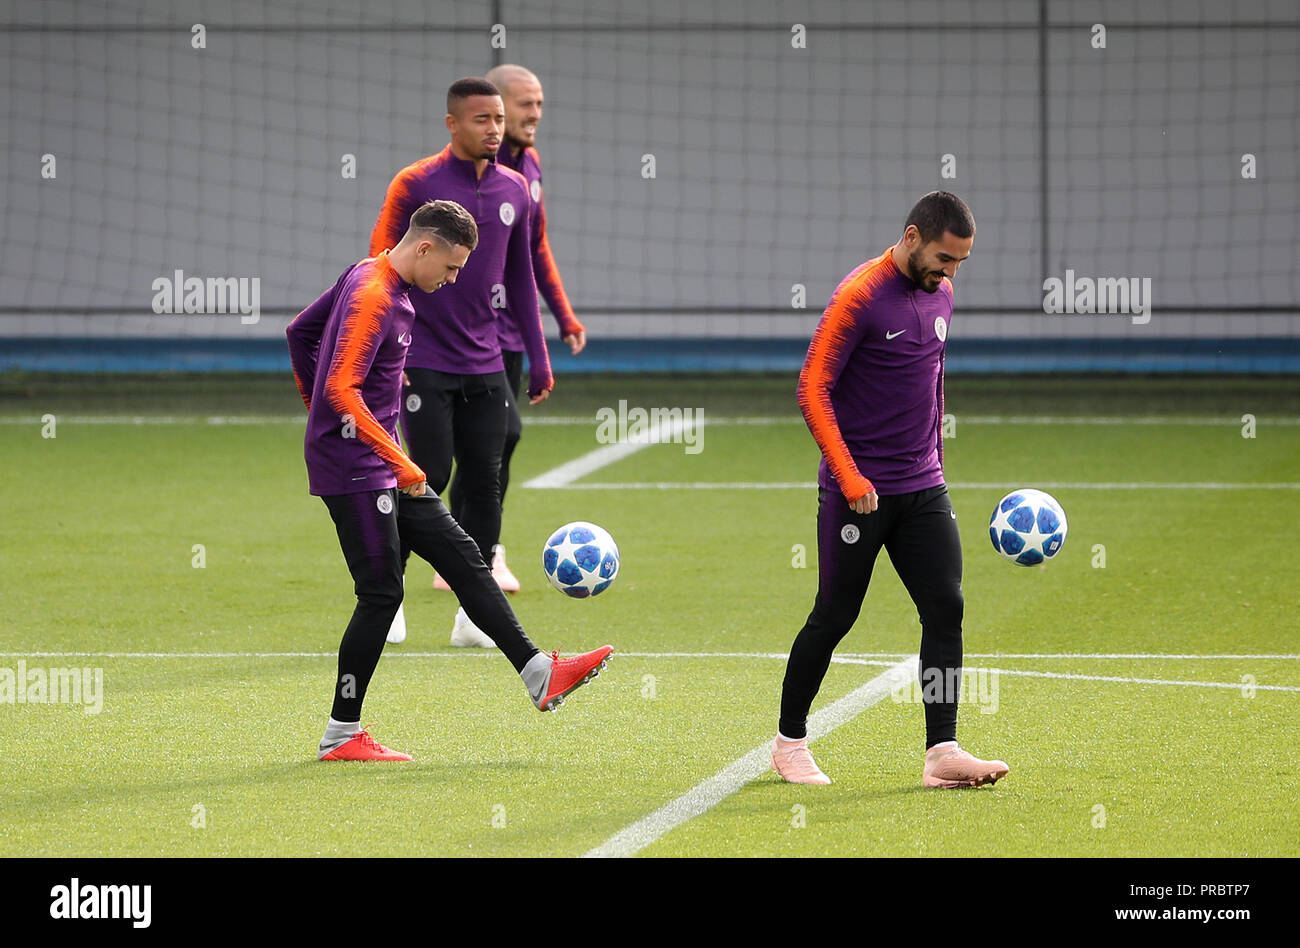 Manchester City's Phil Foden (left) and Ilkay Gundogan during a training session at the City Football Academy, Manchester. Stock Photo